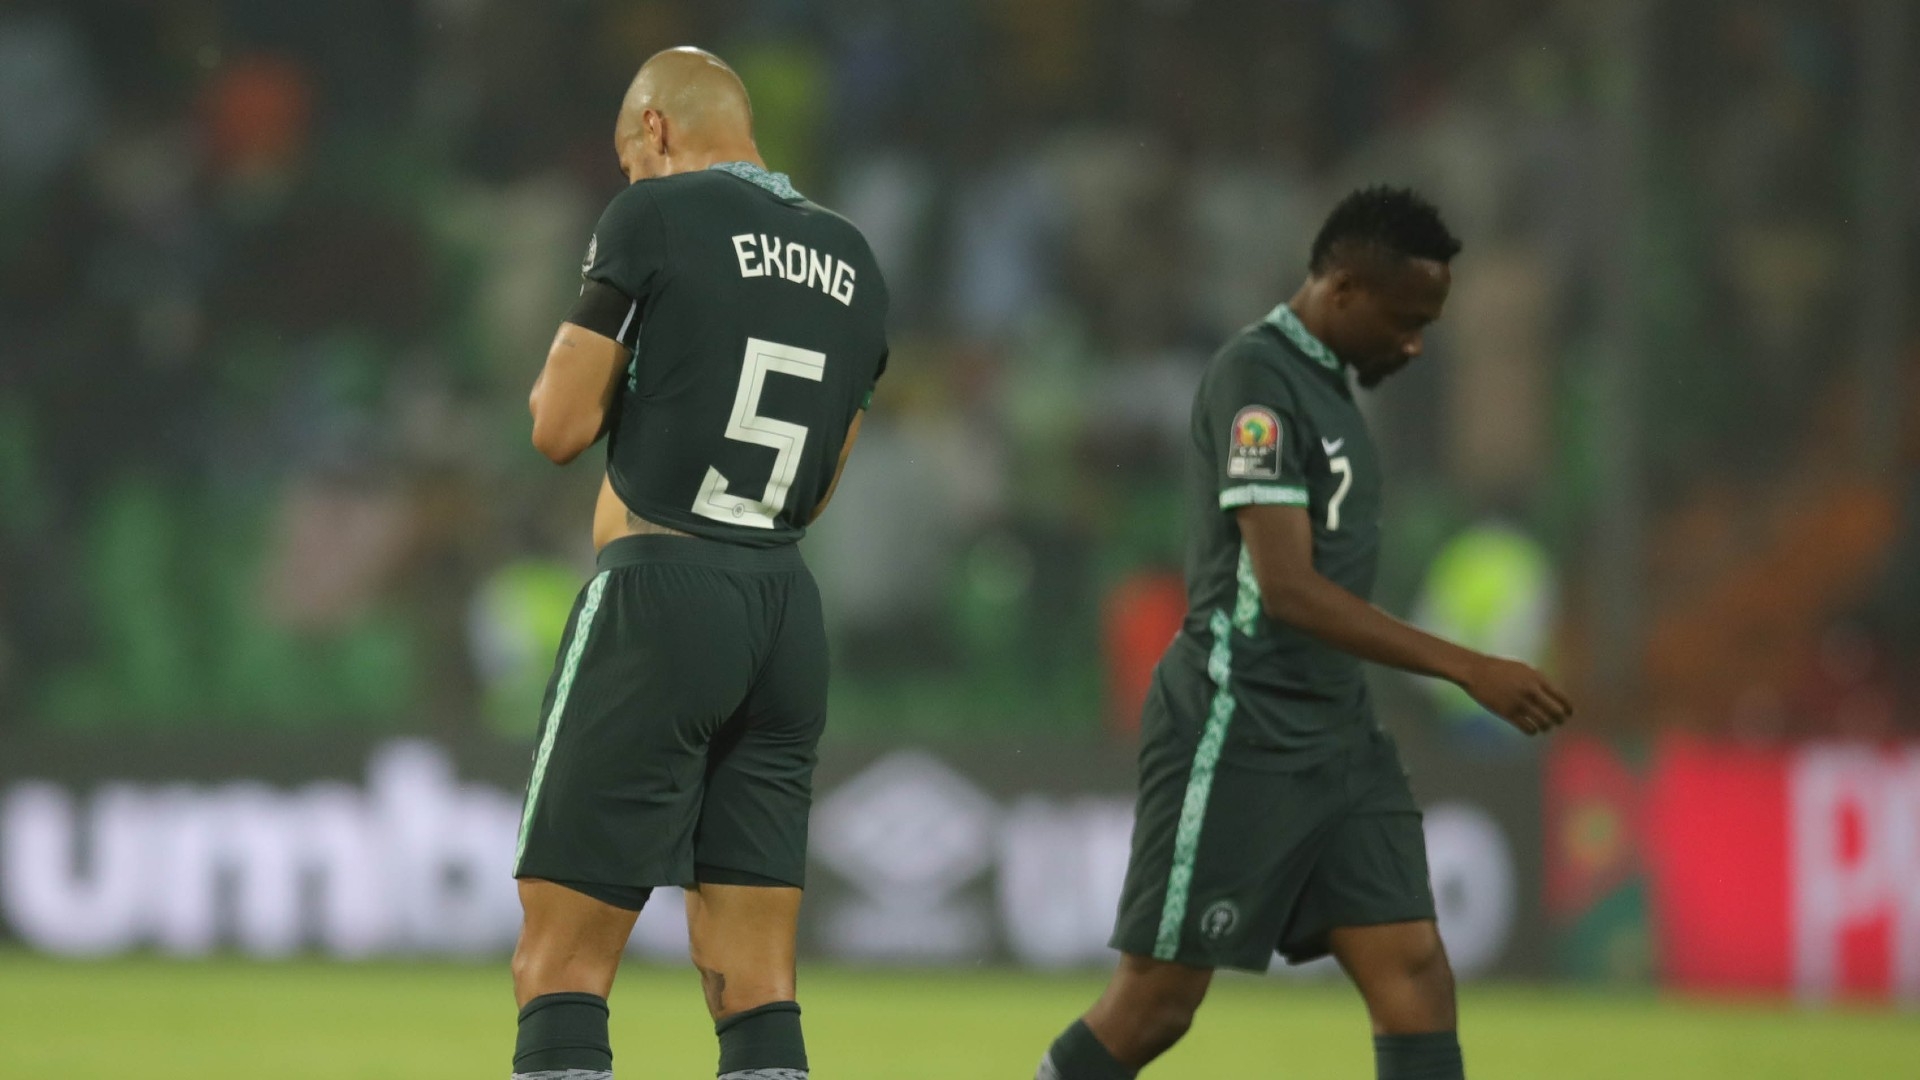 Where Are The Super Eagles? Europe Fans Miss Nigeria in World Cup